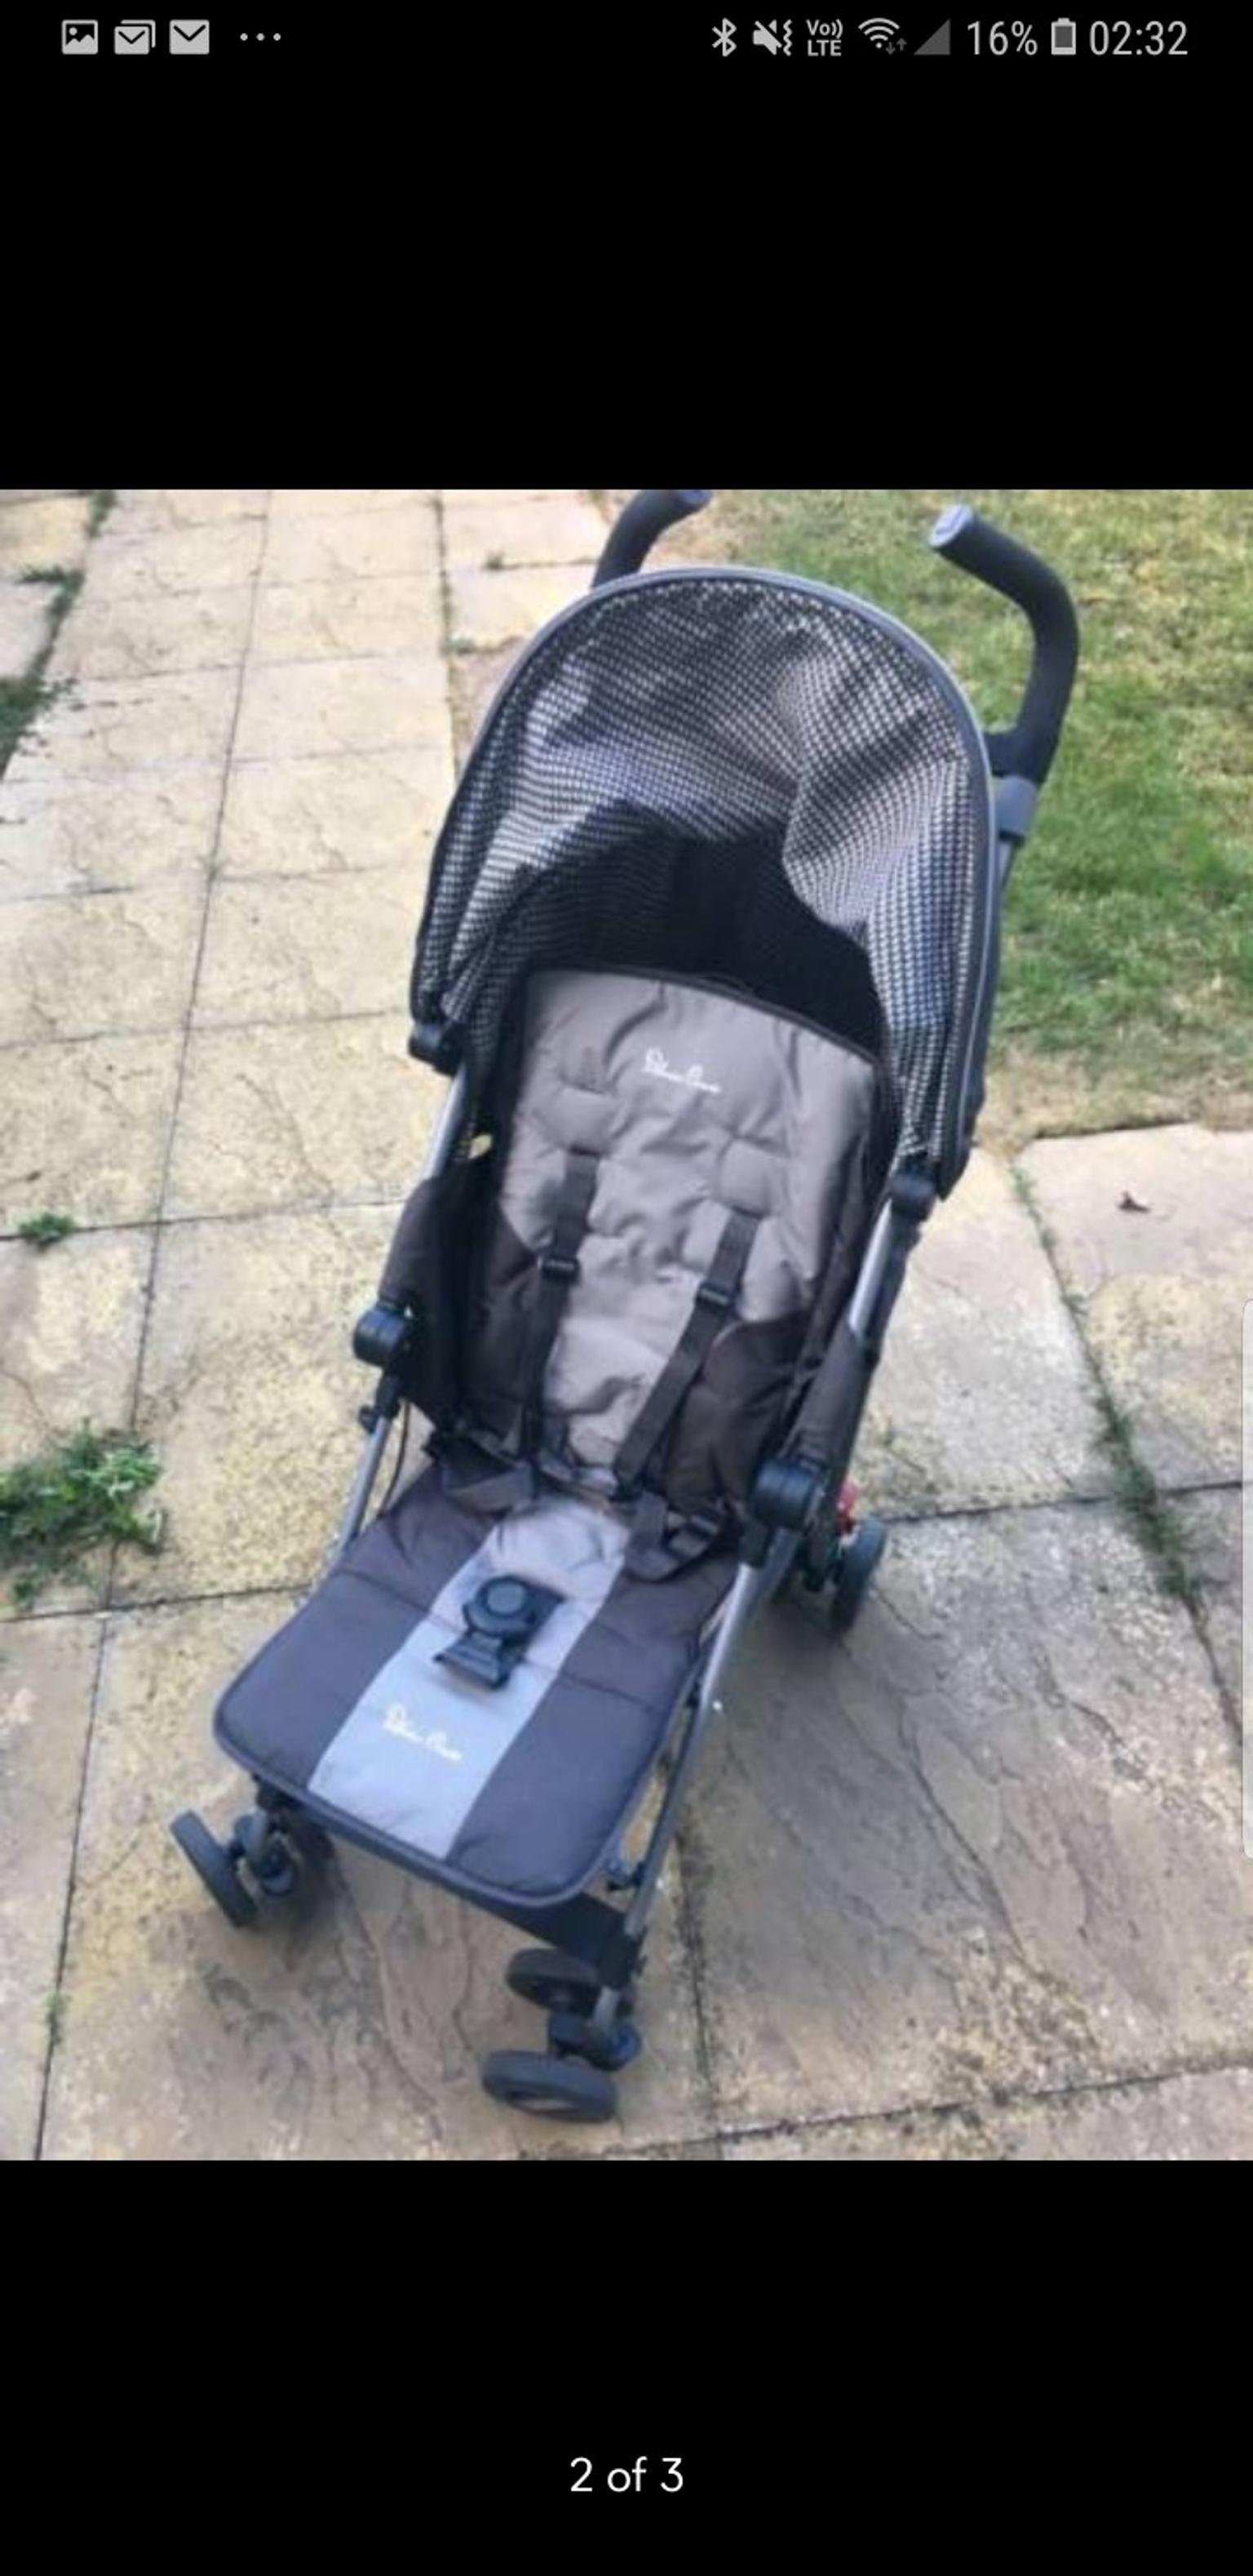 compact stroller up to 25kg